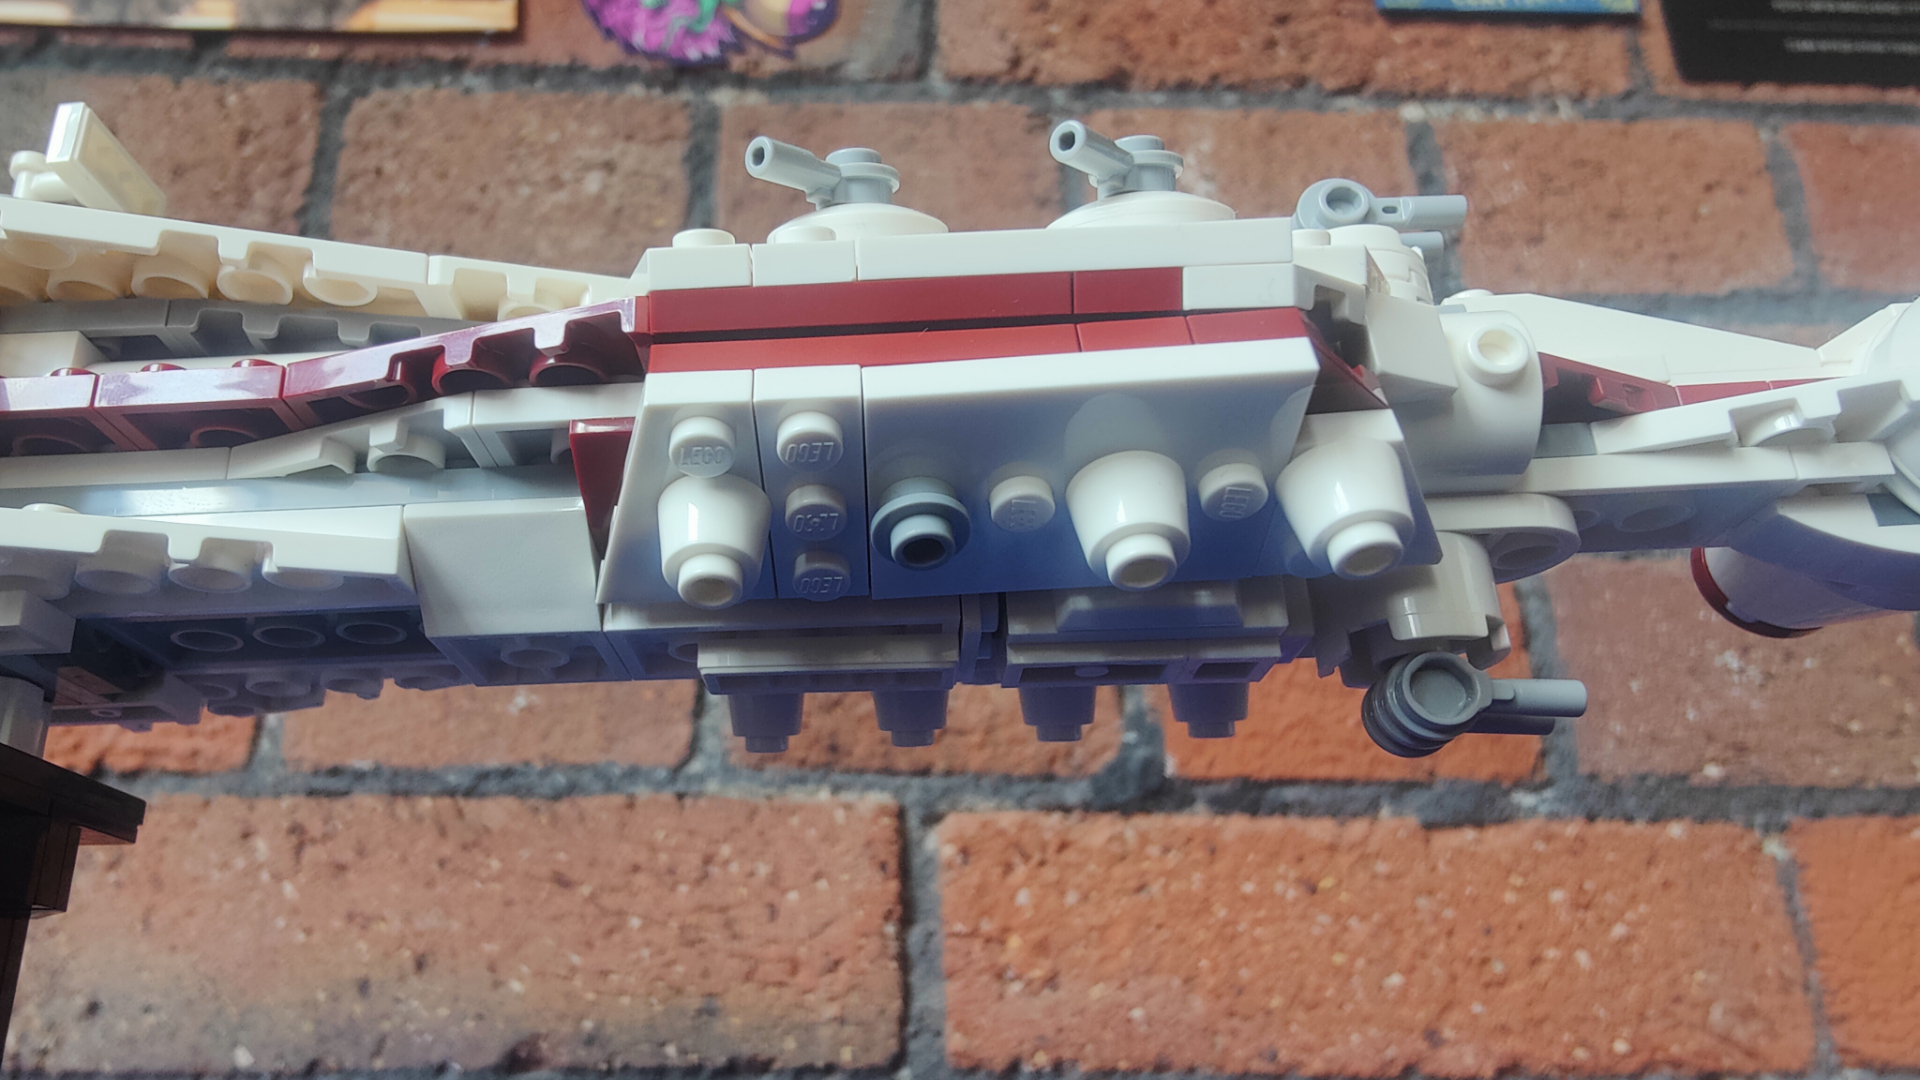 The underside of the Lego Tantive IV, showing one missing escape pod